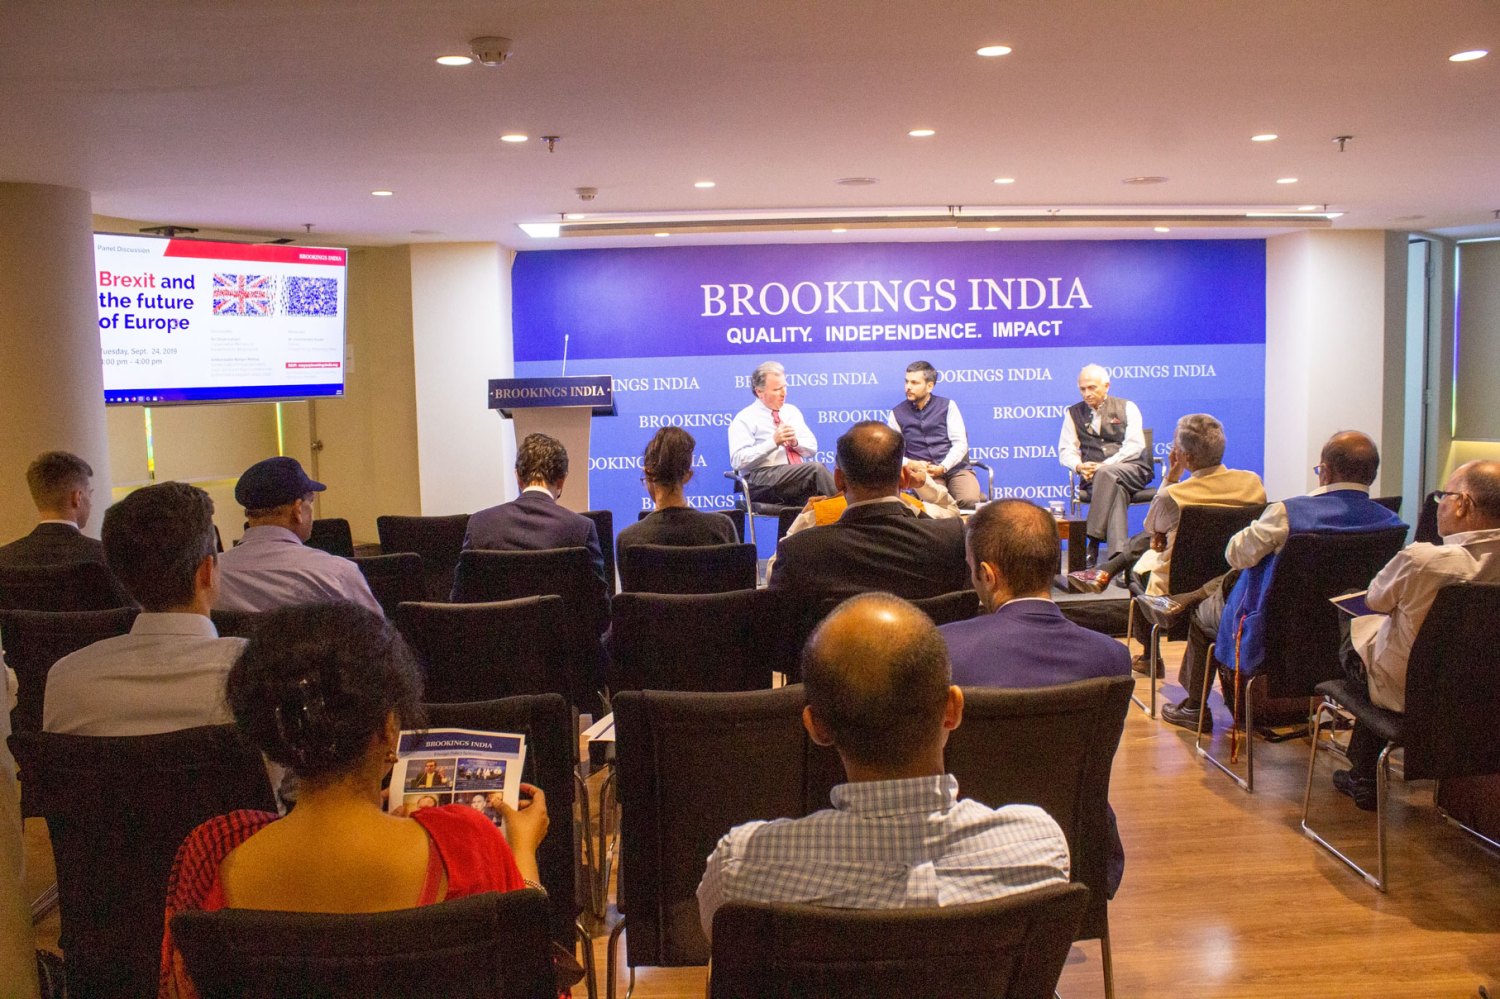 Sir Oliver Letwin, Conservative Member of Parliament for West Dorset, Dr. Constantino Xavier, Fellow, Foreign Policy, Brookings India and   Ambassador Ranjan Mathai, former Indian Foreign Secretary (2011–2013) and High Commissioner to the United Kingdom (2013–2015) at an event on Brexit